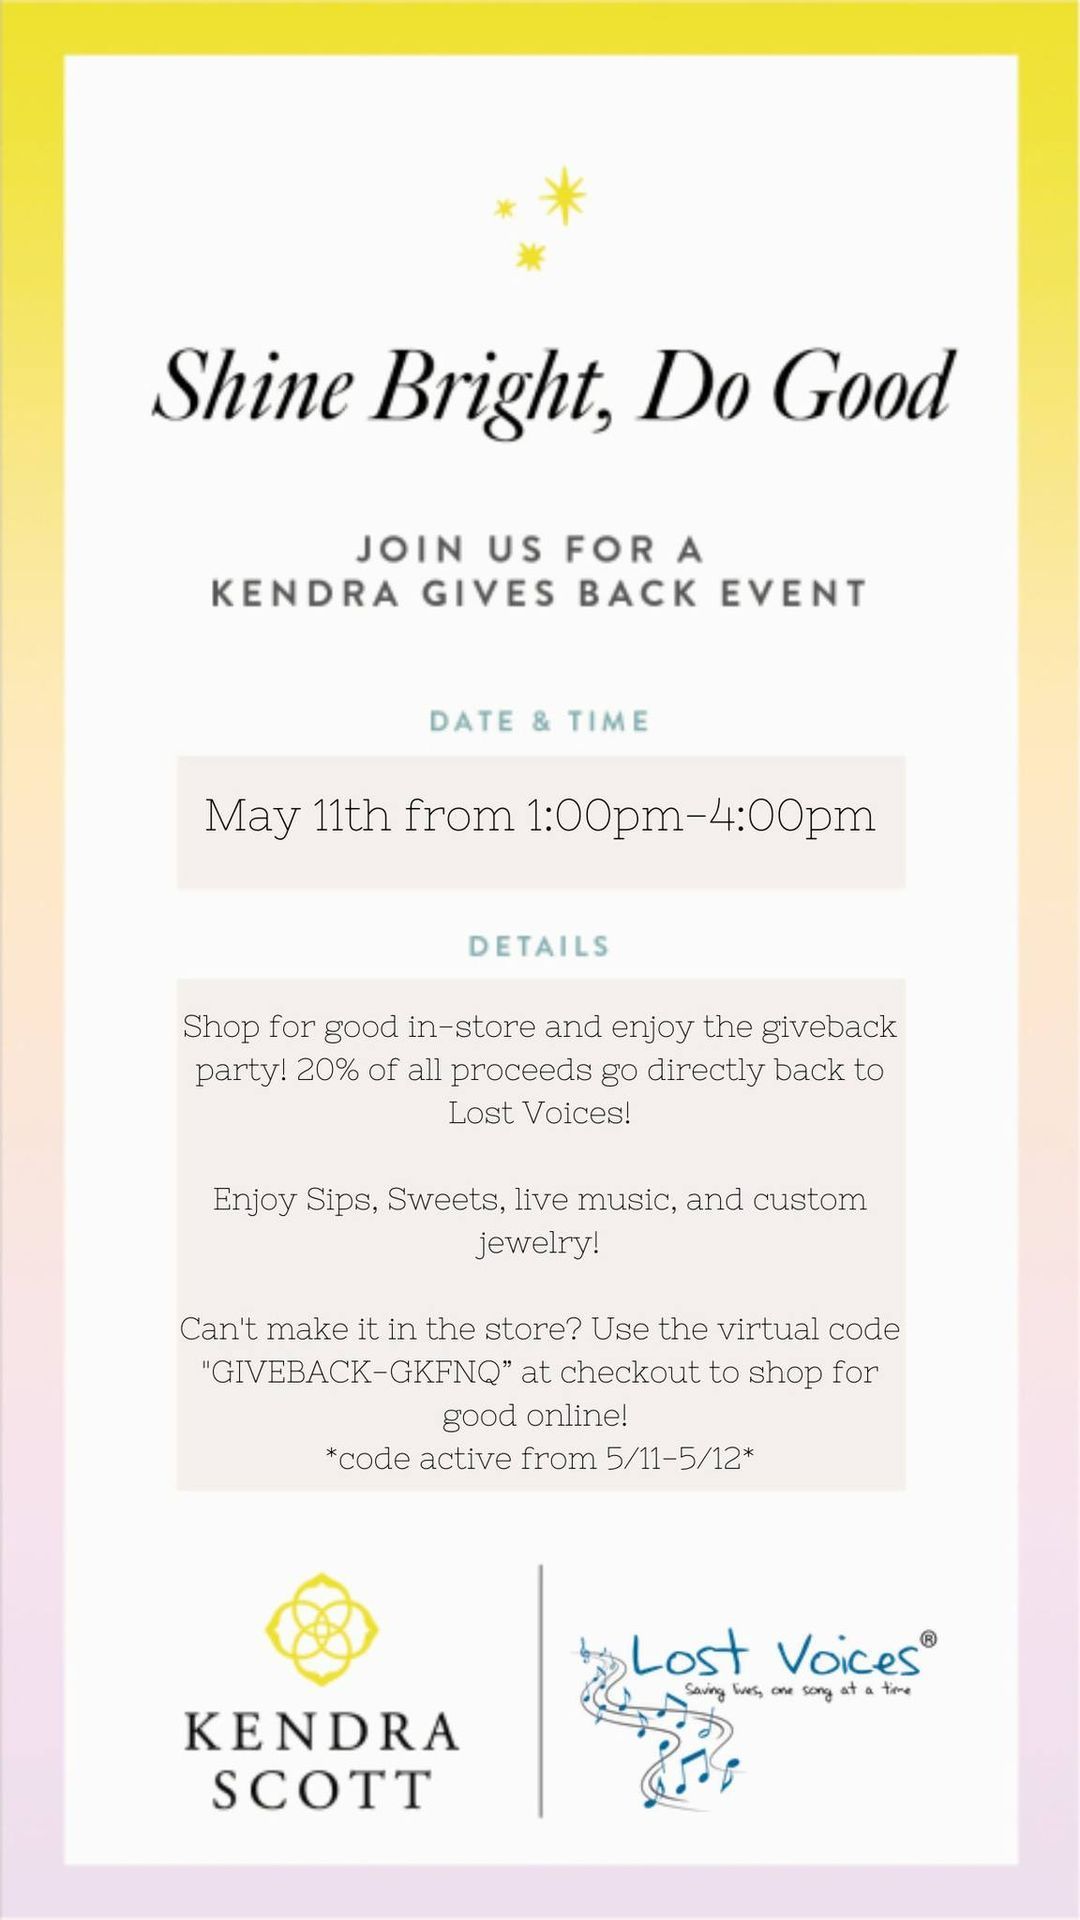 Lost Voices & Kendra Scott Mother's Day Celebration